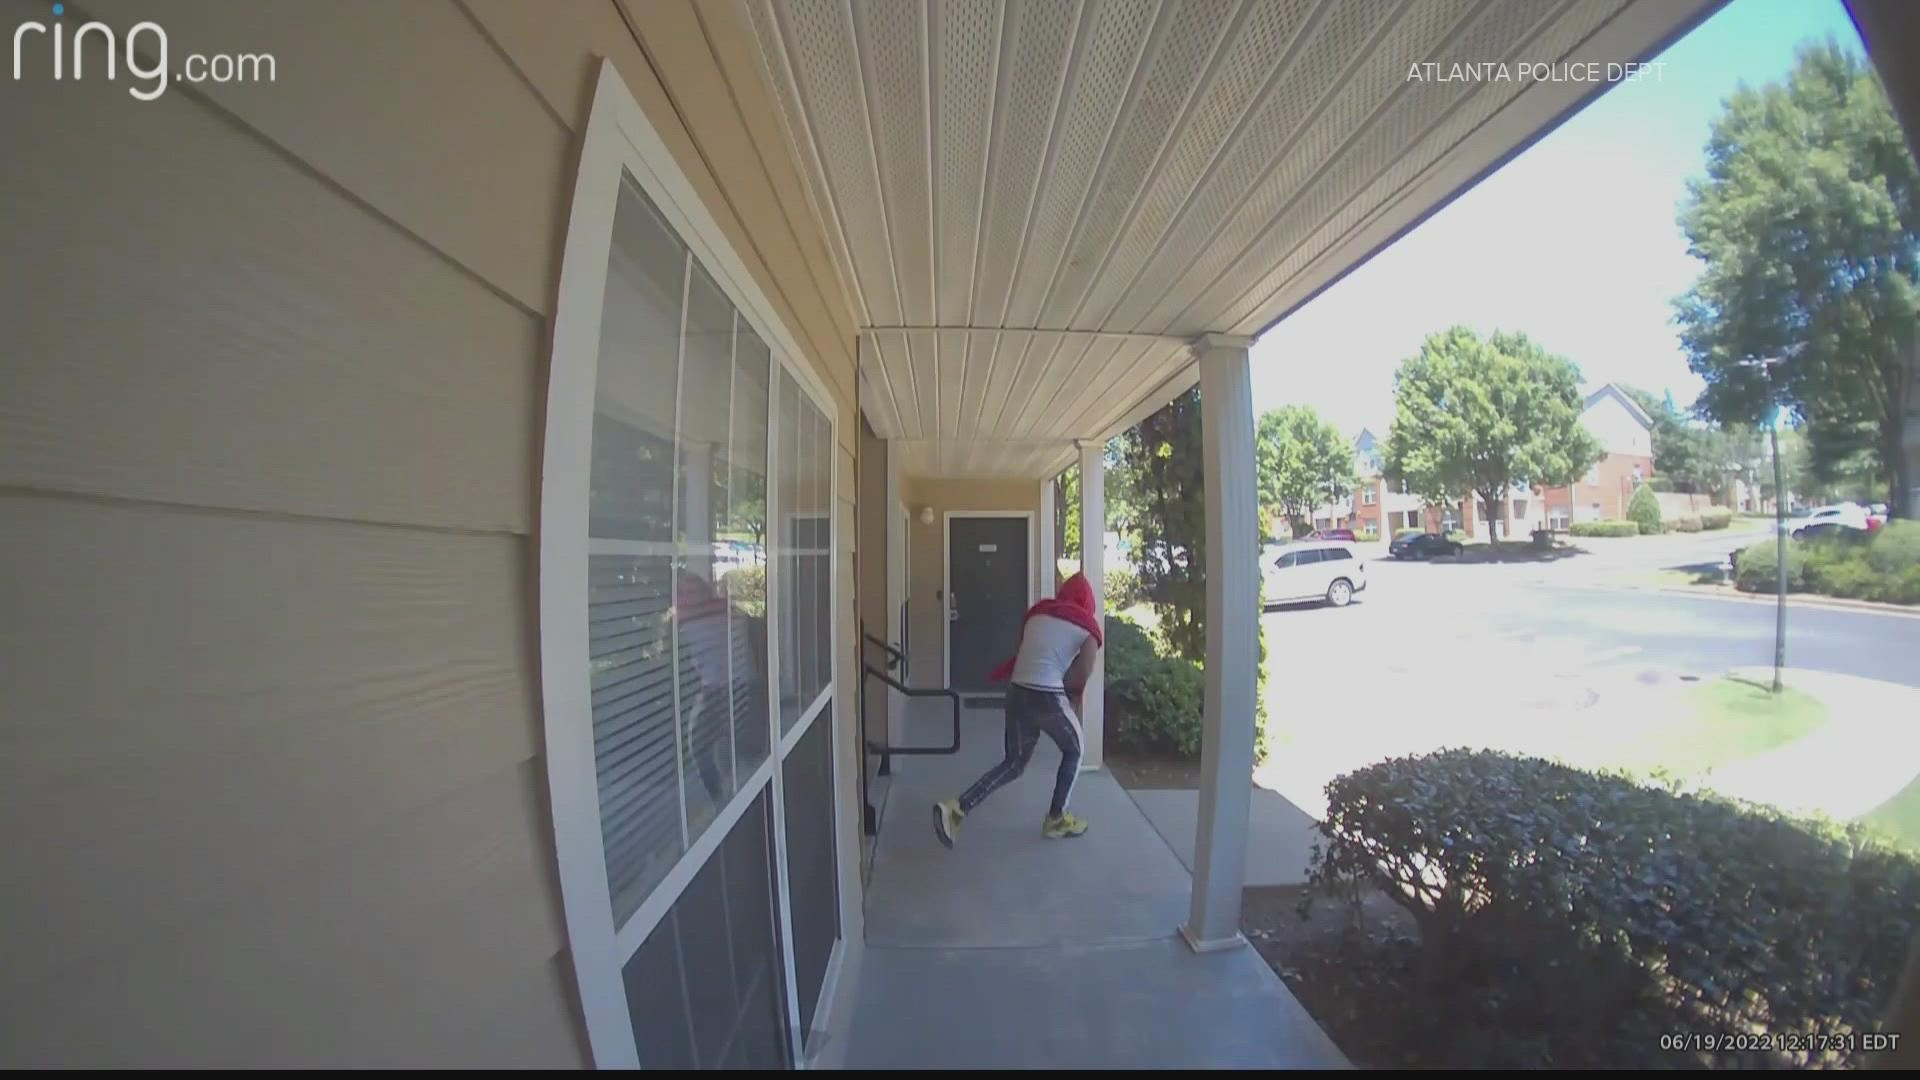 APD released a video of the suspect. It happened on Sunday in the Villages at Carver community.